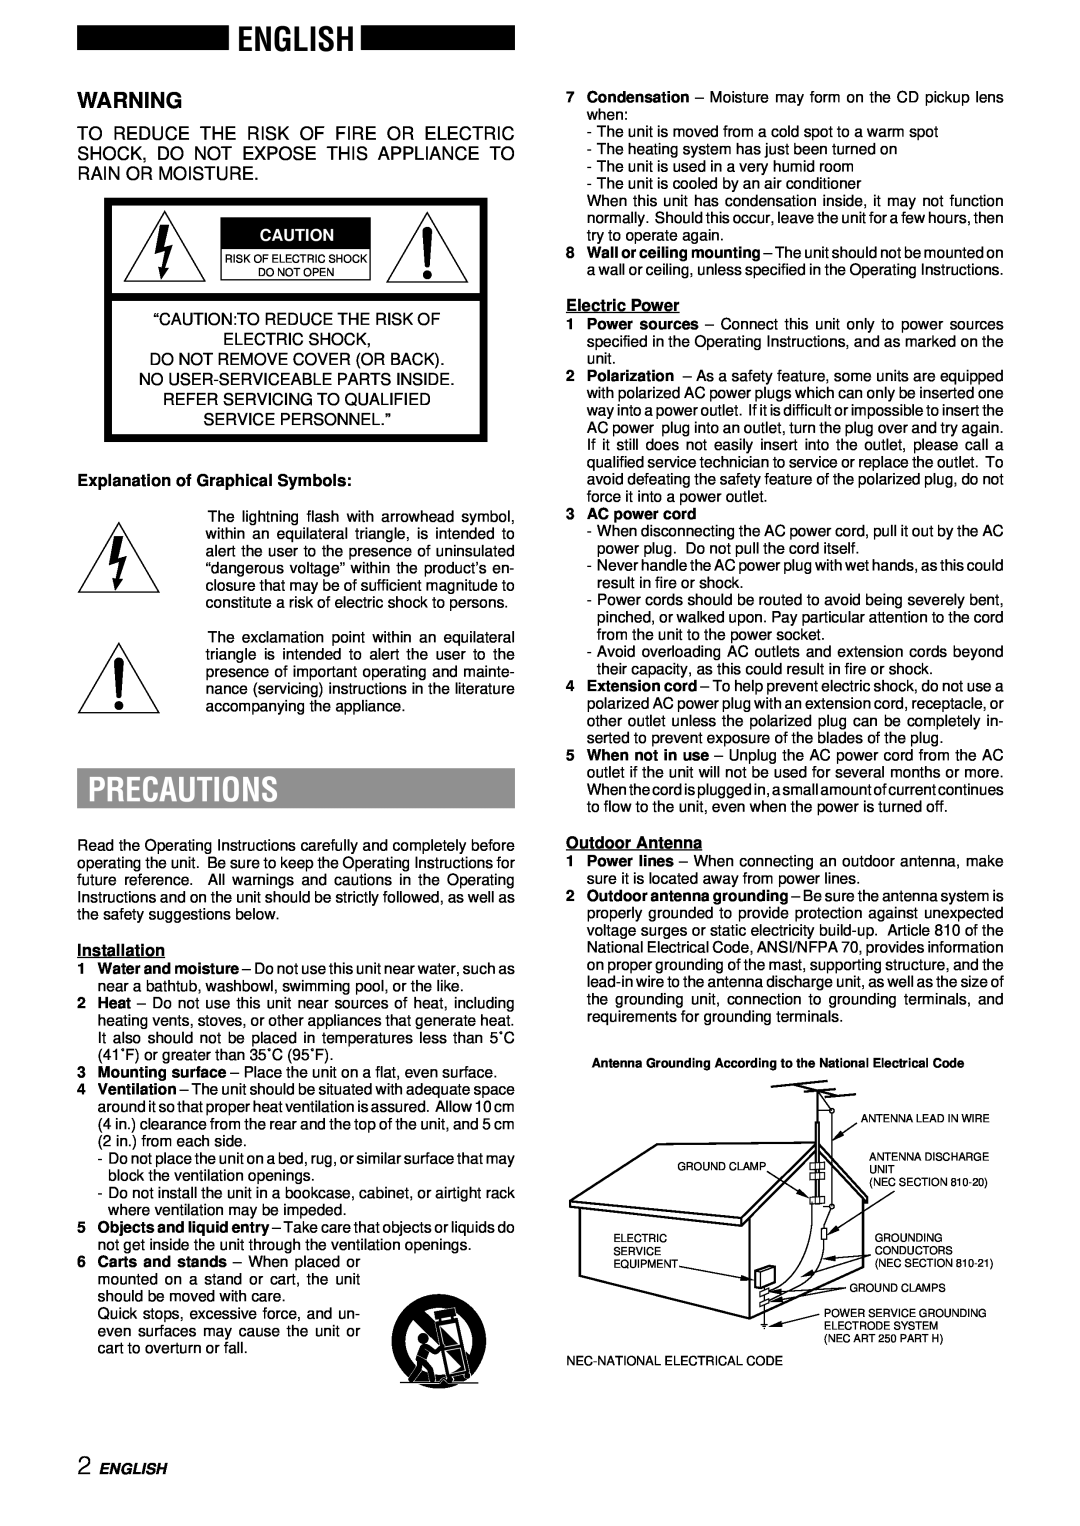 Aiwa LCX-357 manual English, Precautions, “Caution To Reduce The Risk Of, Do Not Remove Cover Or Back, Service Personnel.” 